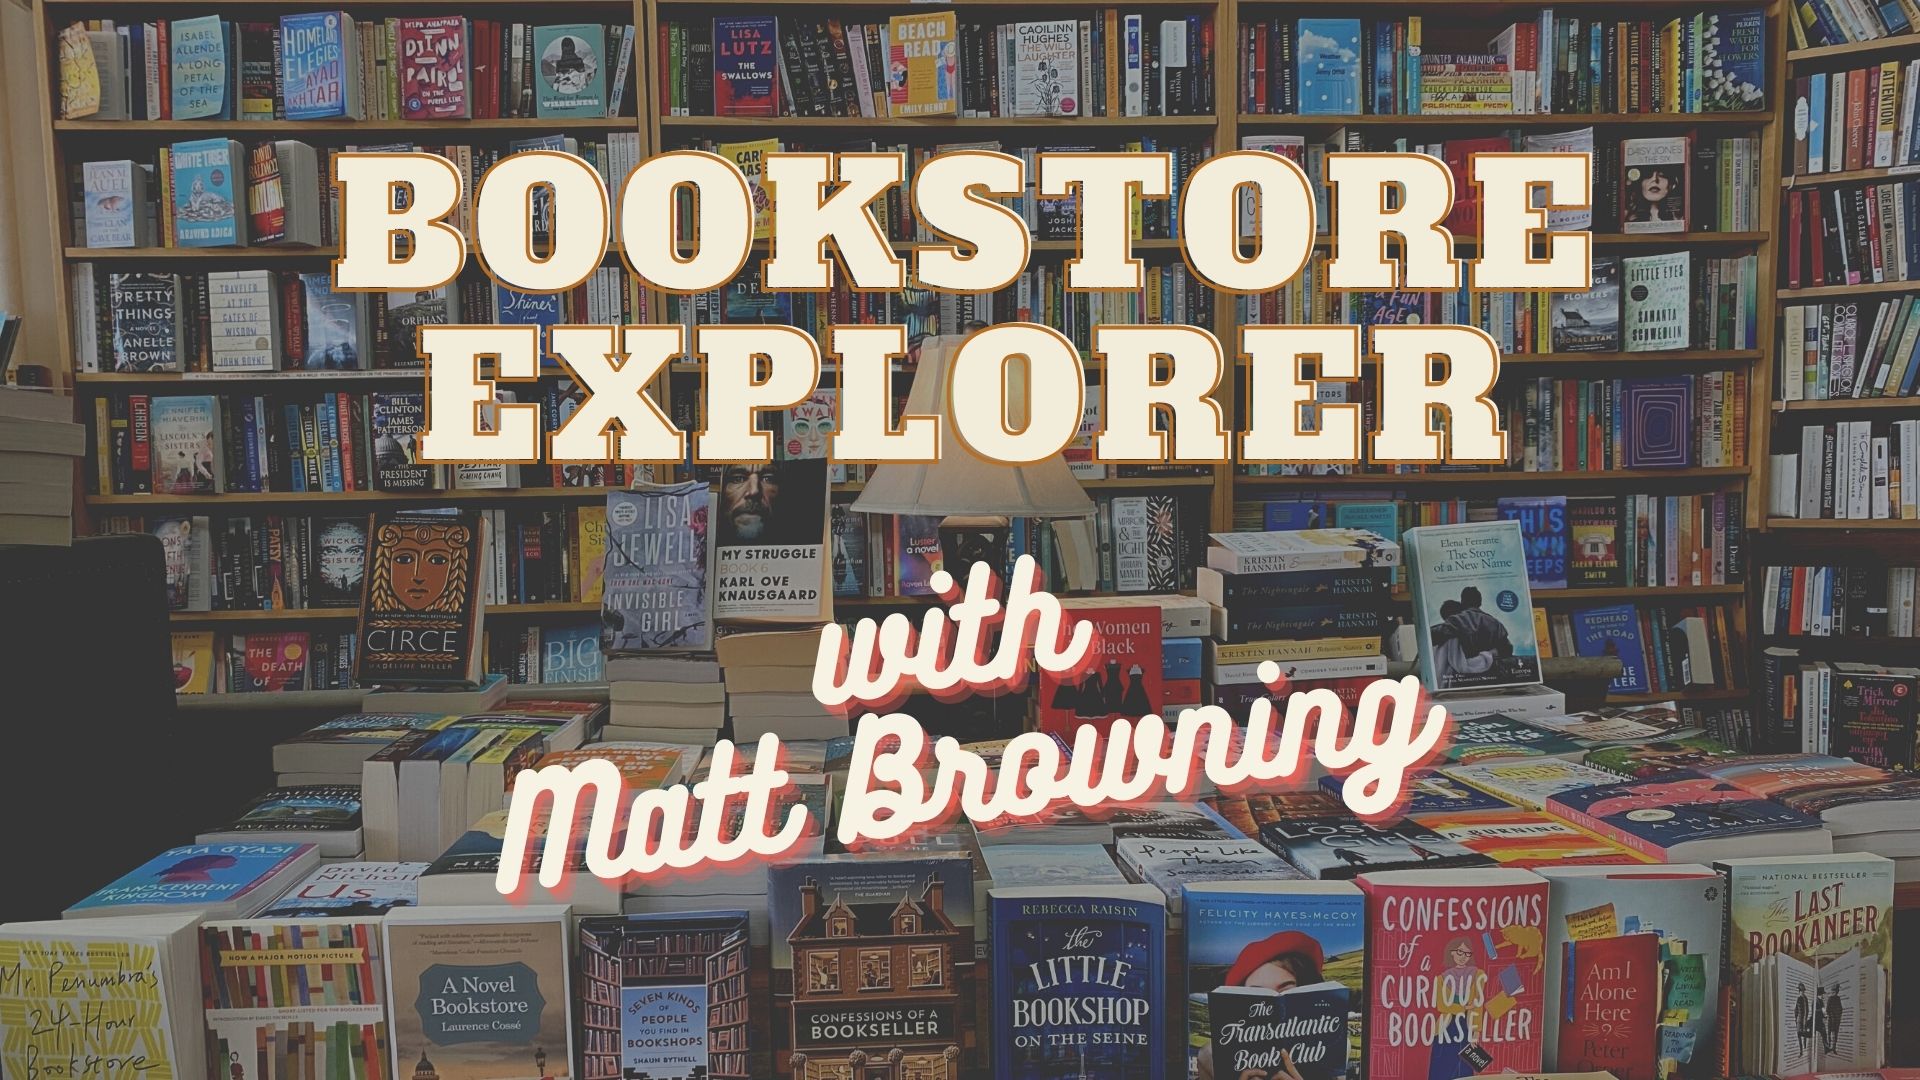 Bookstore Explorer Podcast Available Now